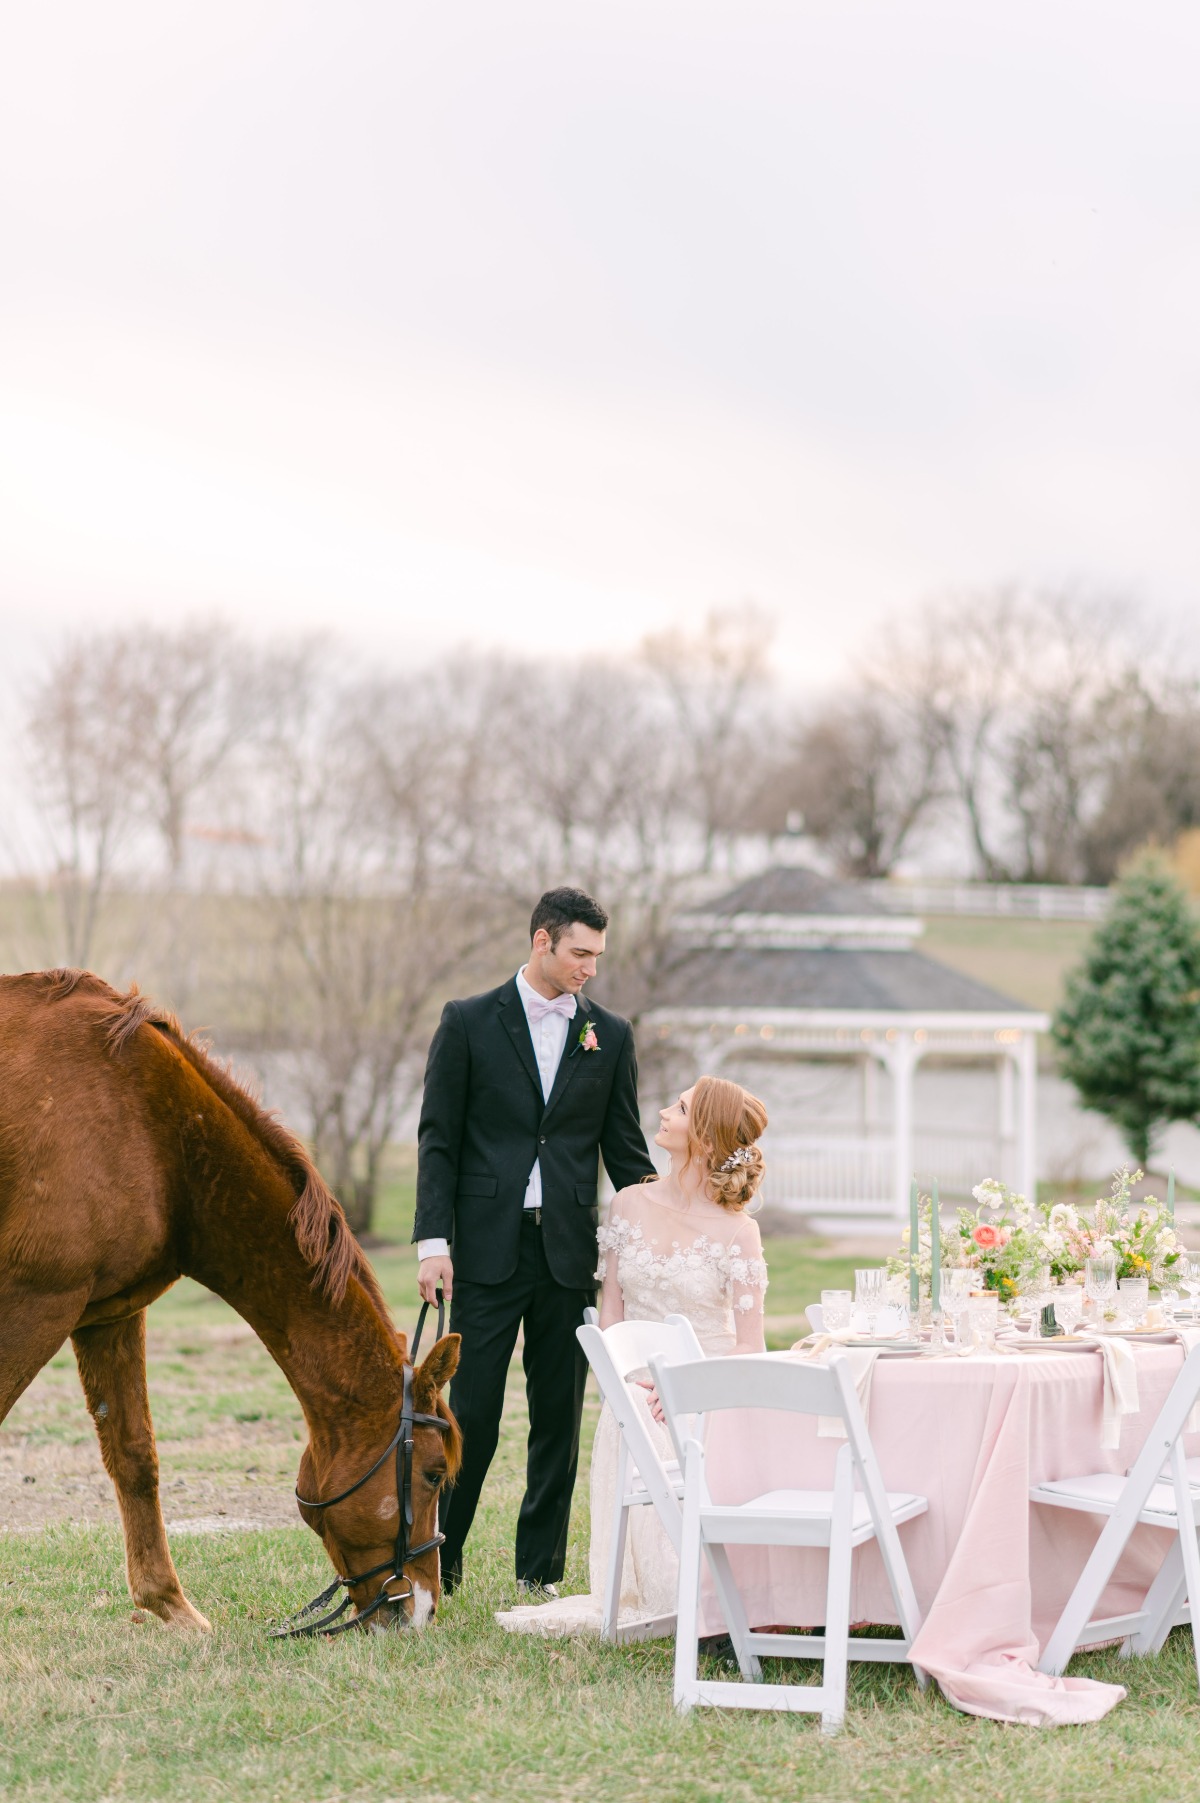 Equestrian bride and groom with horse